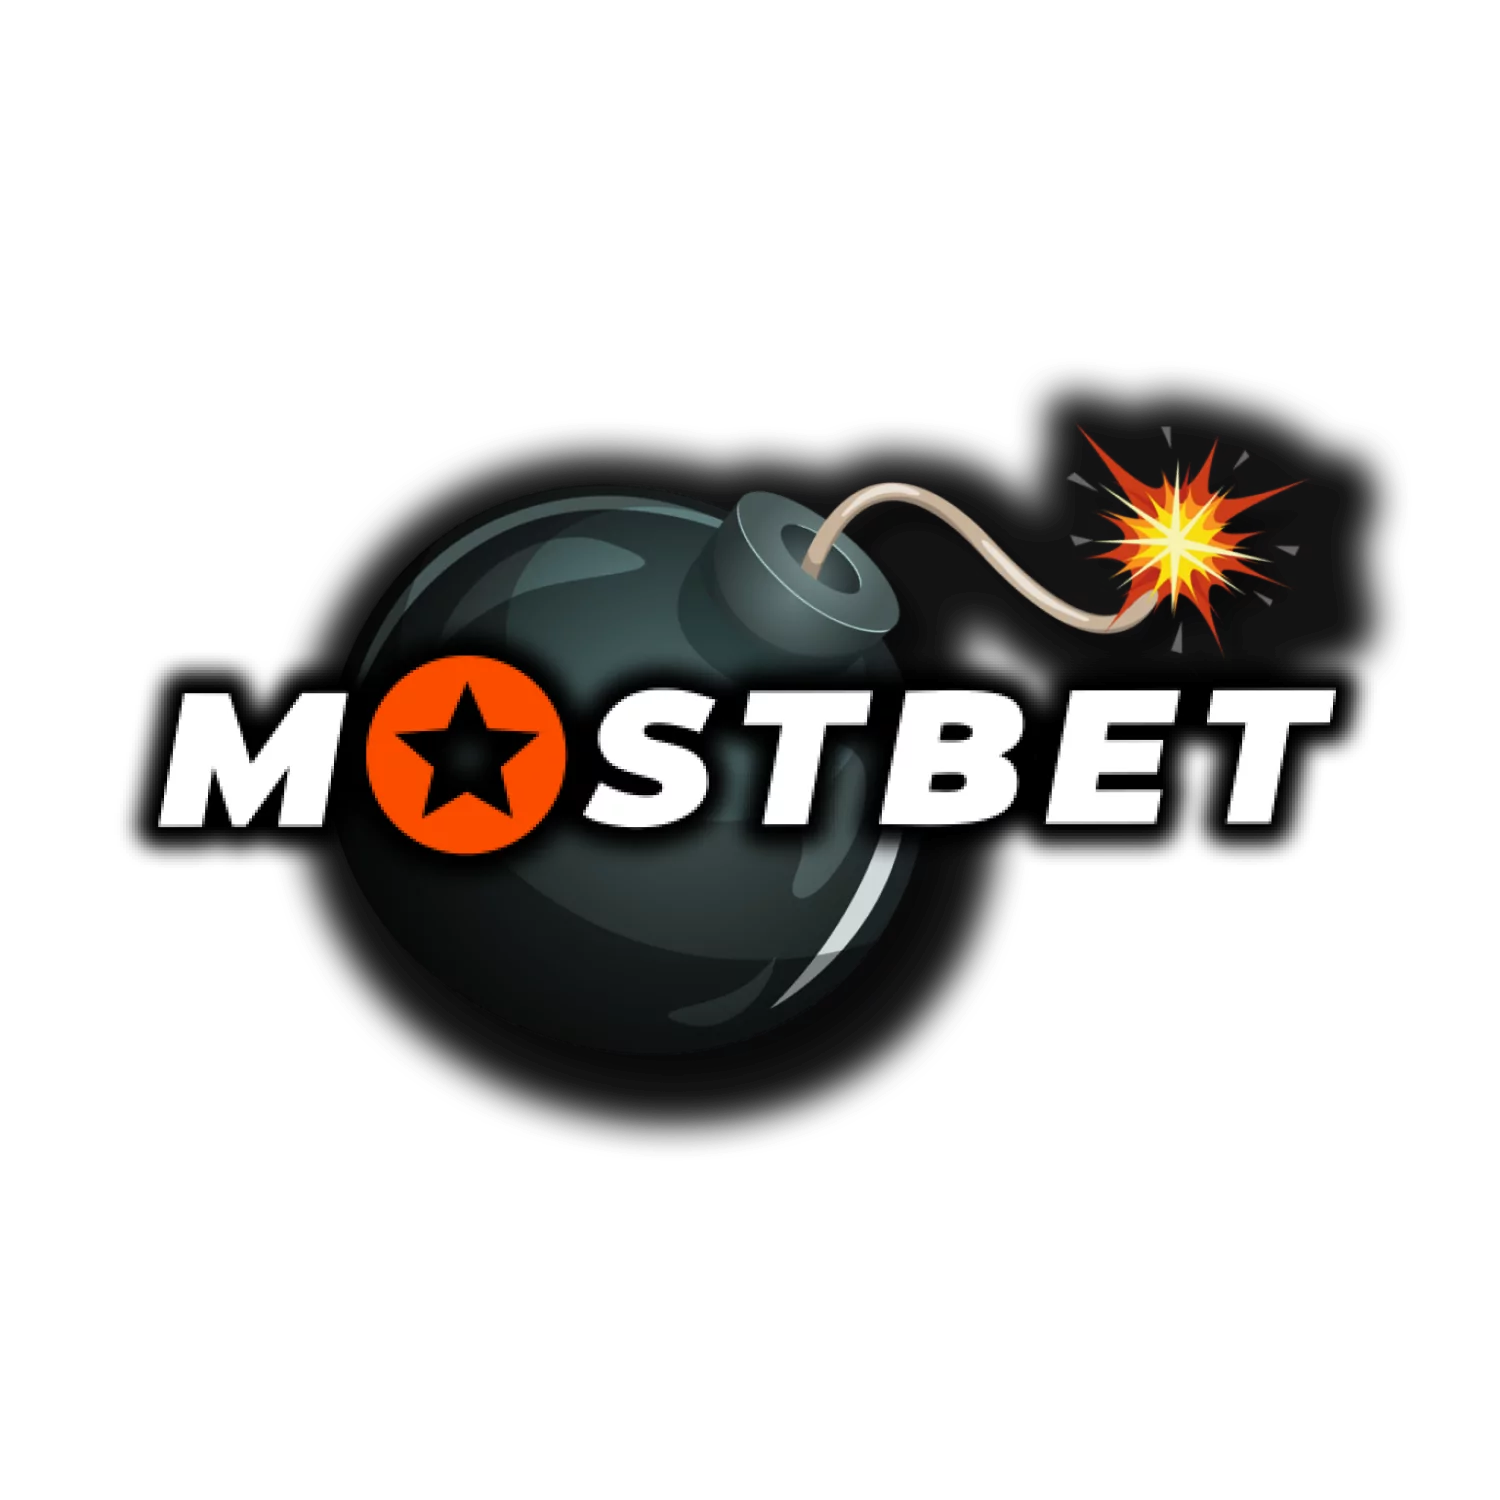 On Mostbet, play games with mines.